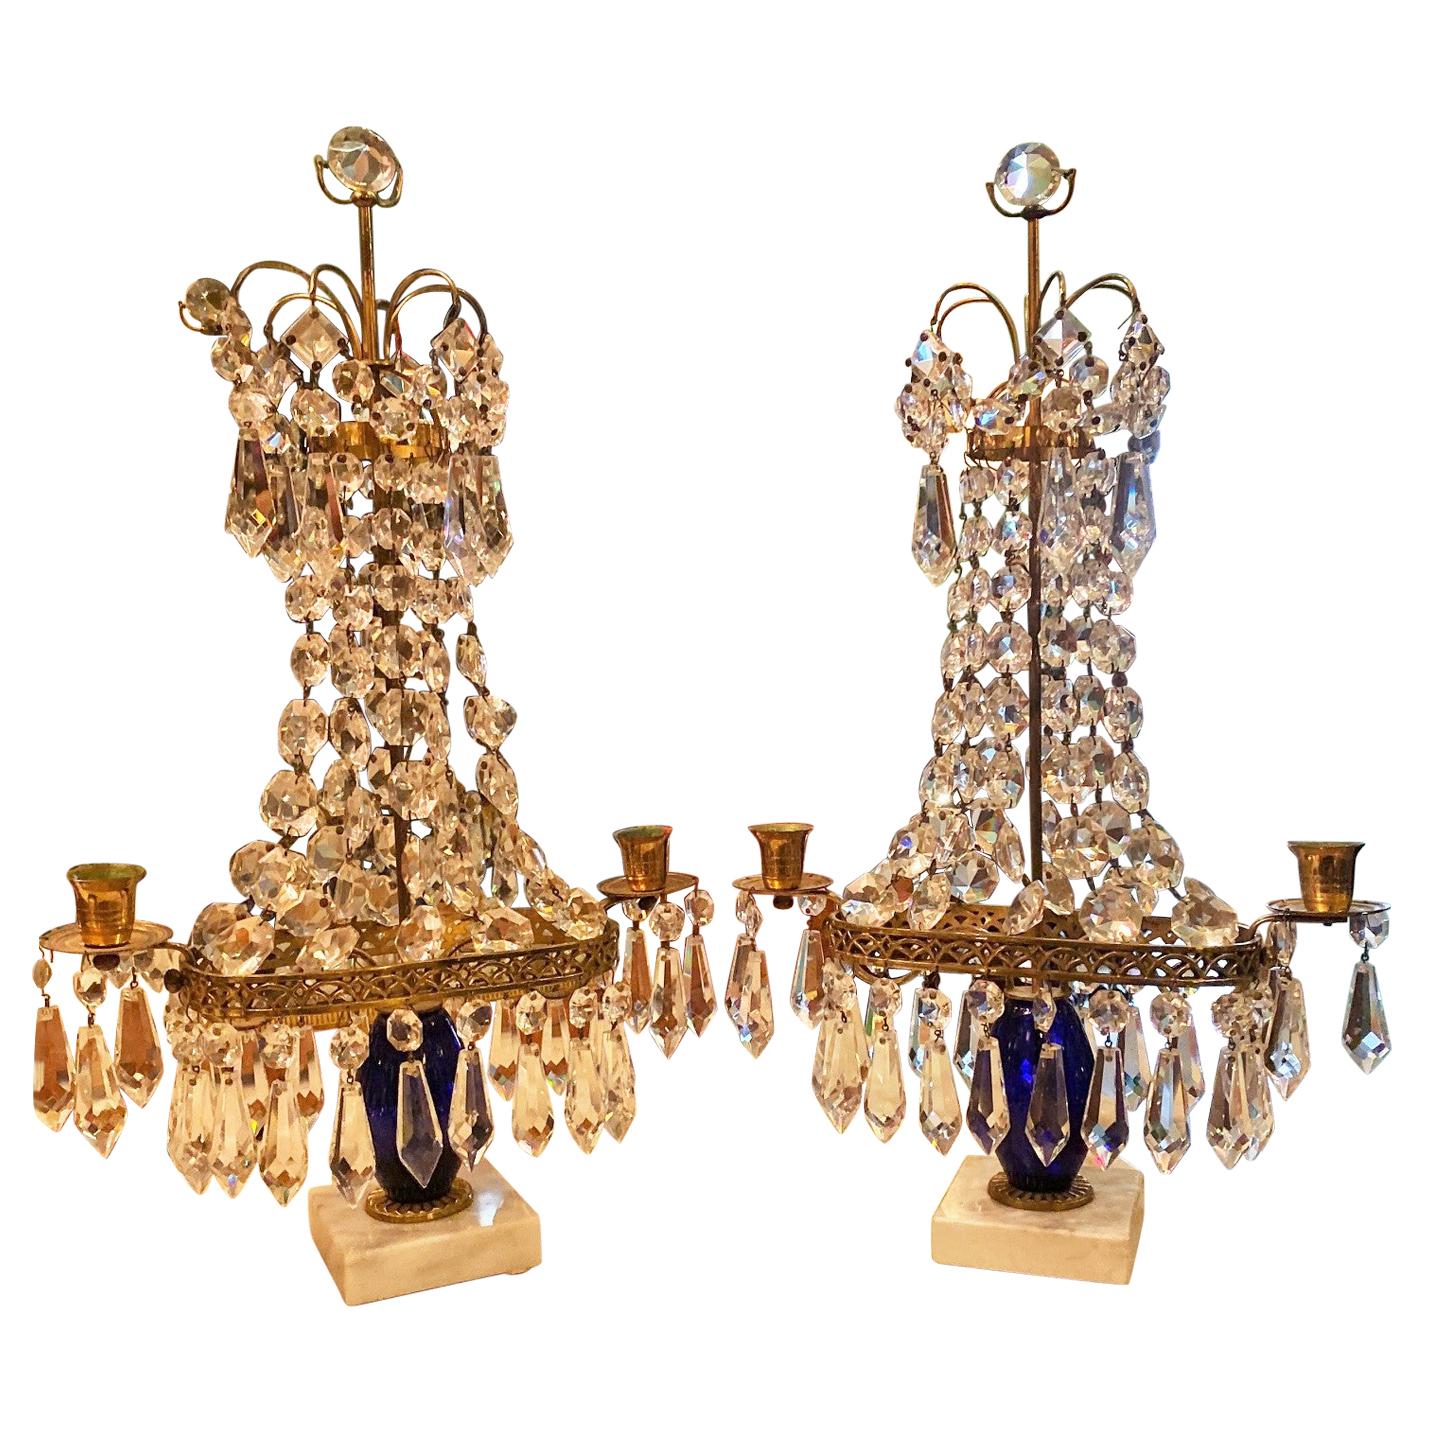 Crystal Cobalt Blue Glass & Gilt Bronze Light Candleholder Girandoles candelabra . A Very Exquisite pair of late 19th century Swedish cut-glass crystal Girandole candelabra. Mounted on white marble stone base candleholders. The reflection of the